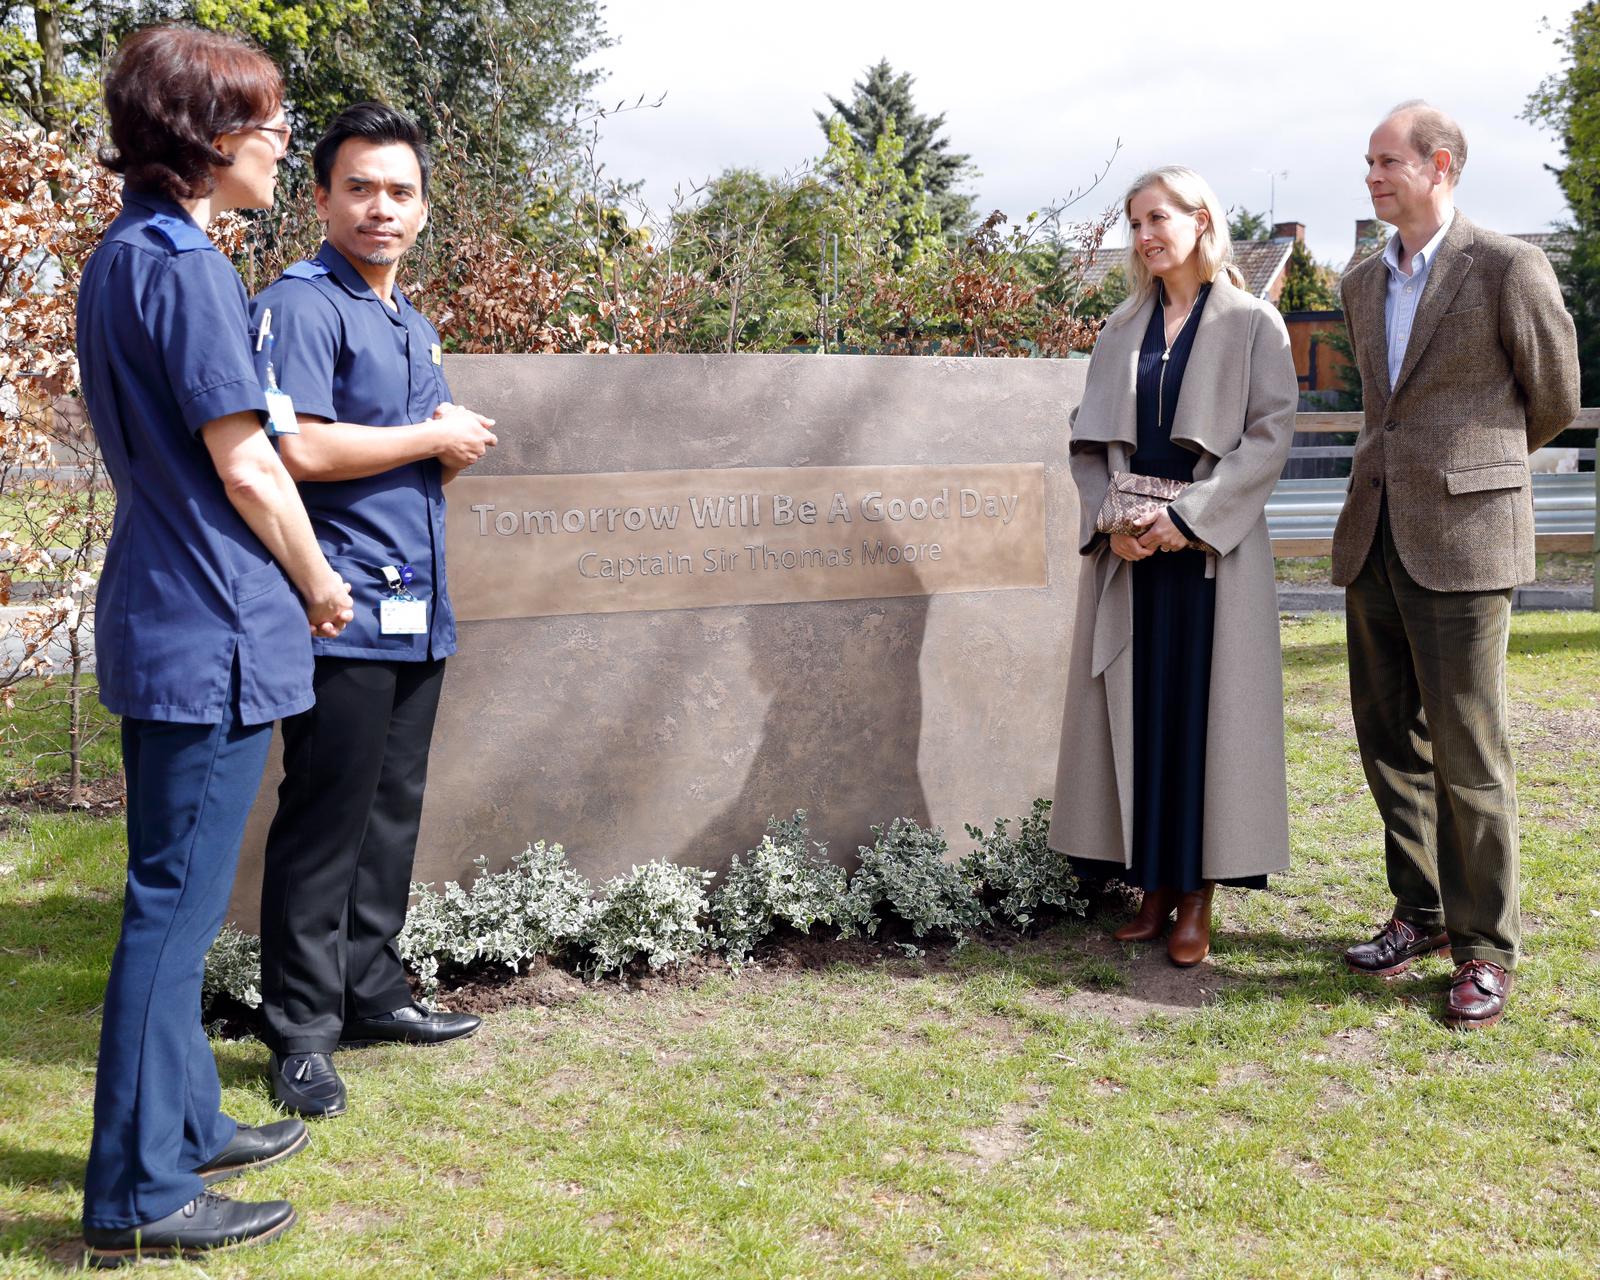 the earl and countess of wessex stand next to a stone plinth reading 'tomorrow will be a good day', the saying of captain tom moore. edward and sophie stand on the right, wearing a tweed jacket and grey long coat respectively, as they chat to two nurses in uniform